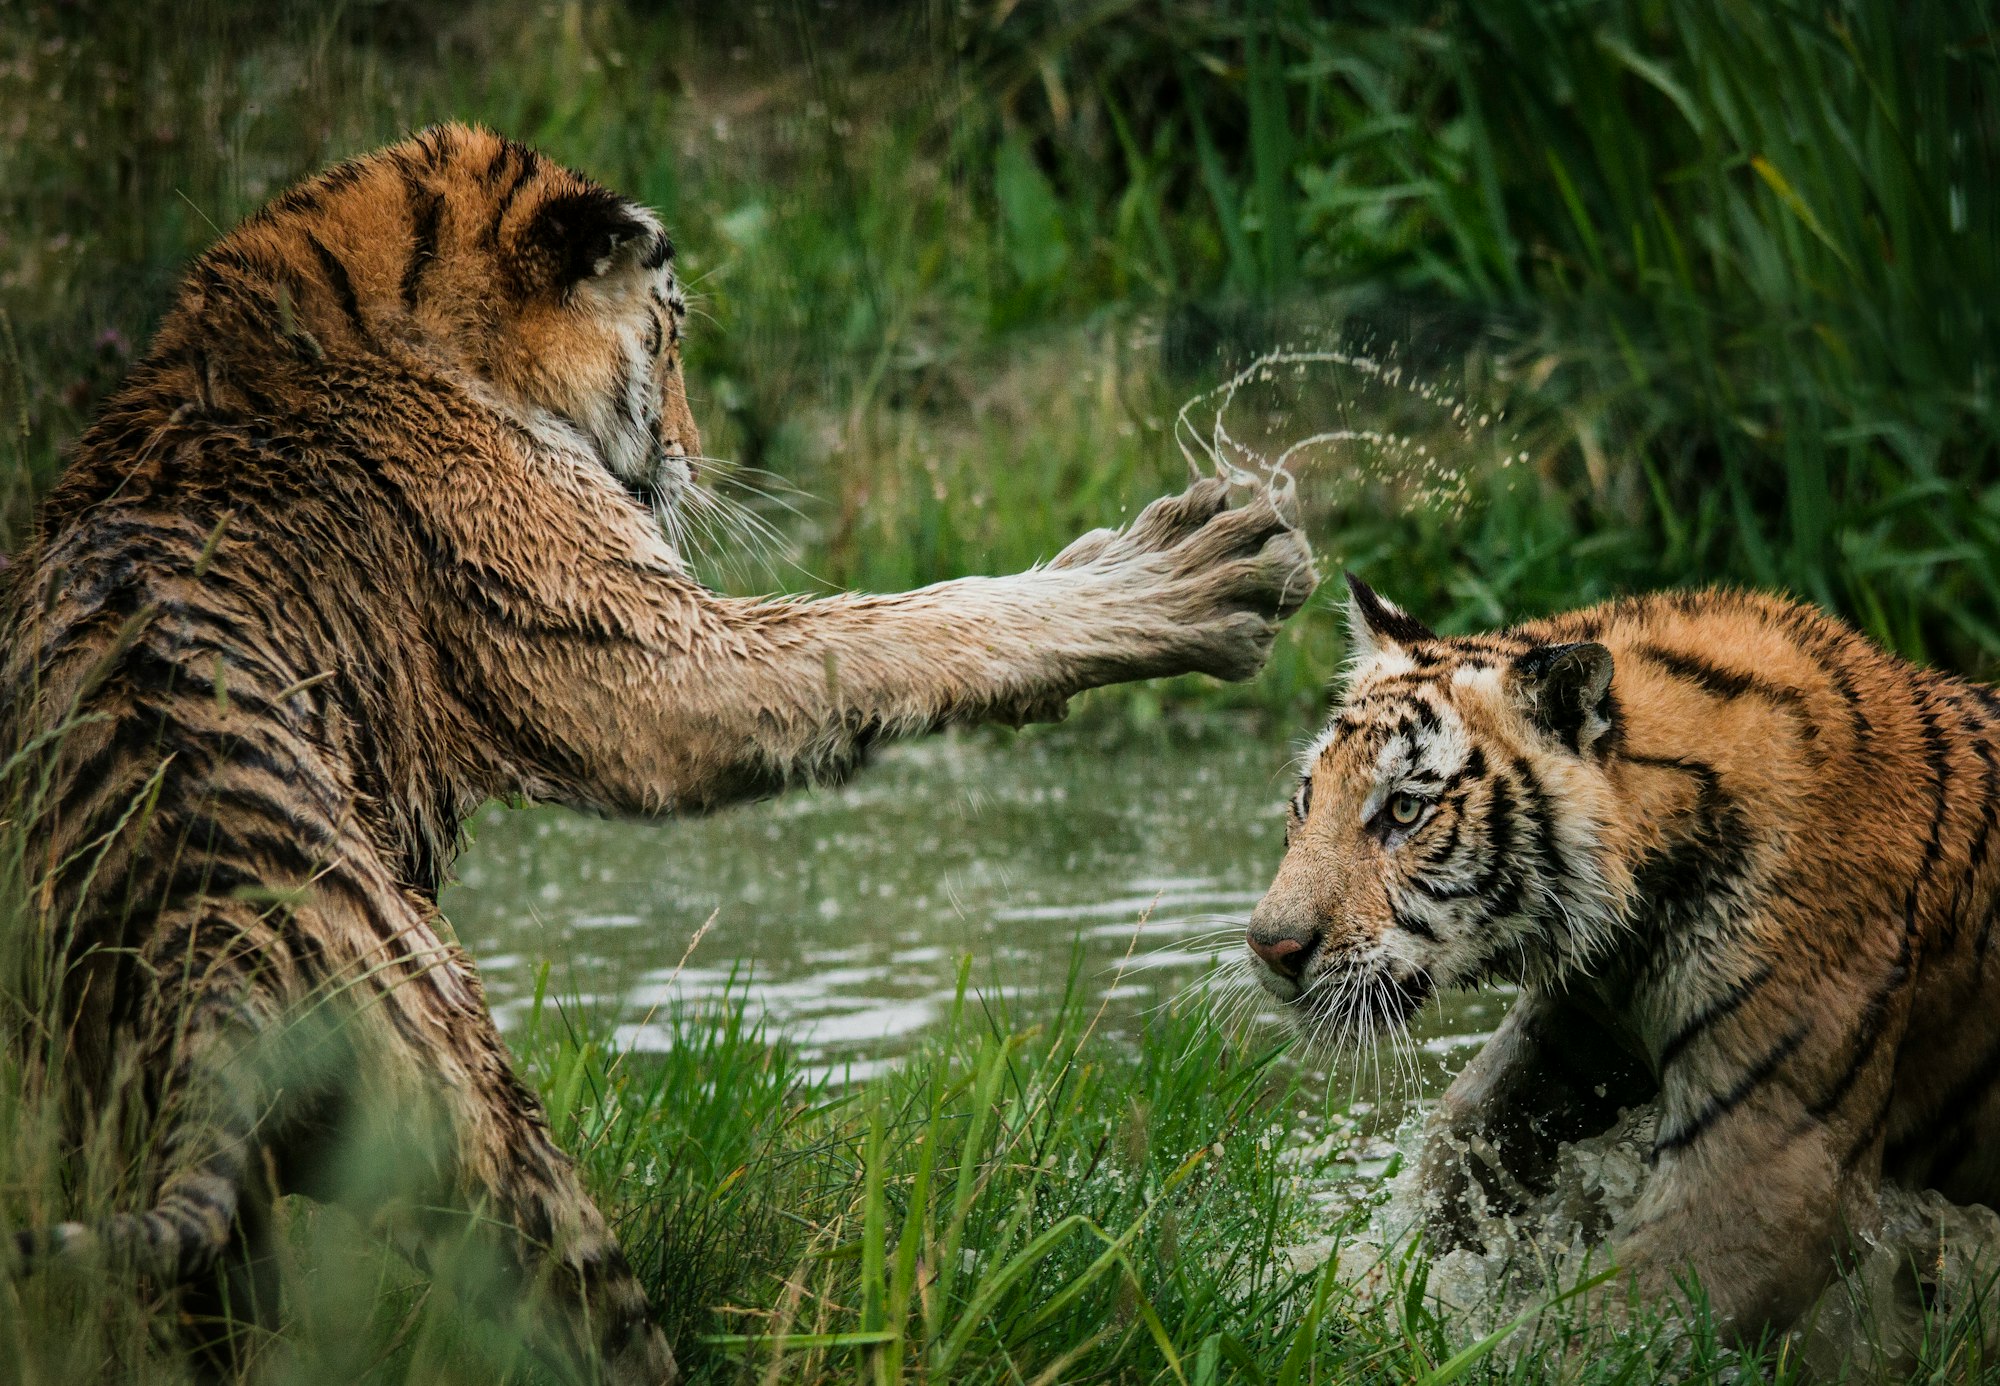 Tiger cubs playing in the water